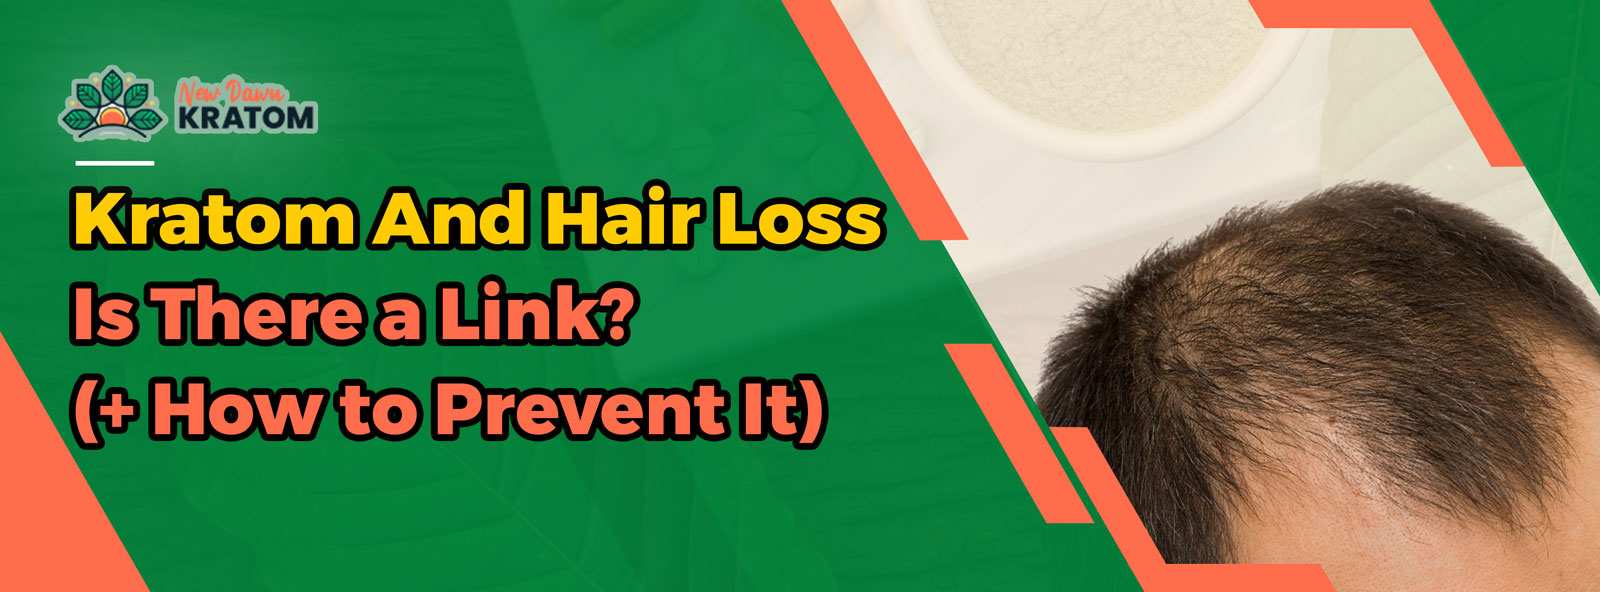 kratom and hair loss : is there a link? (+ how to prevent it)